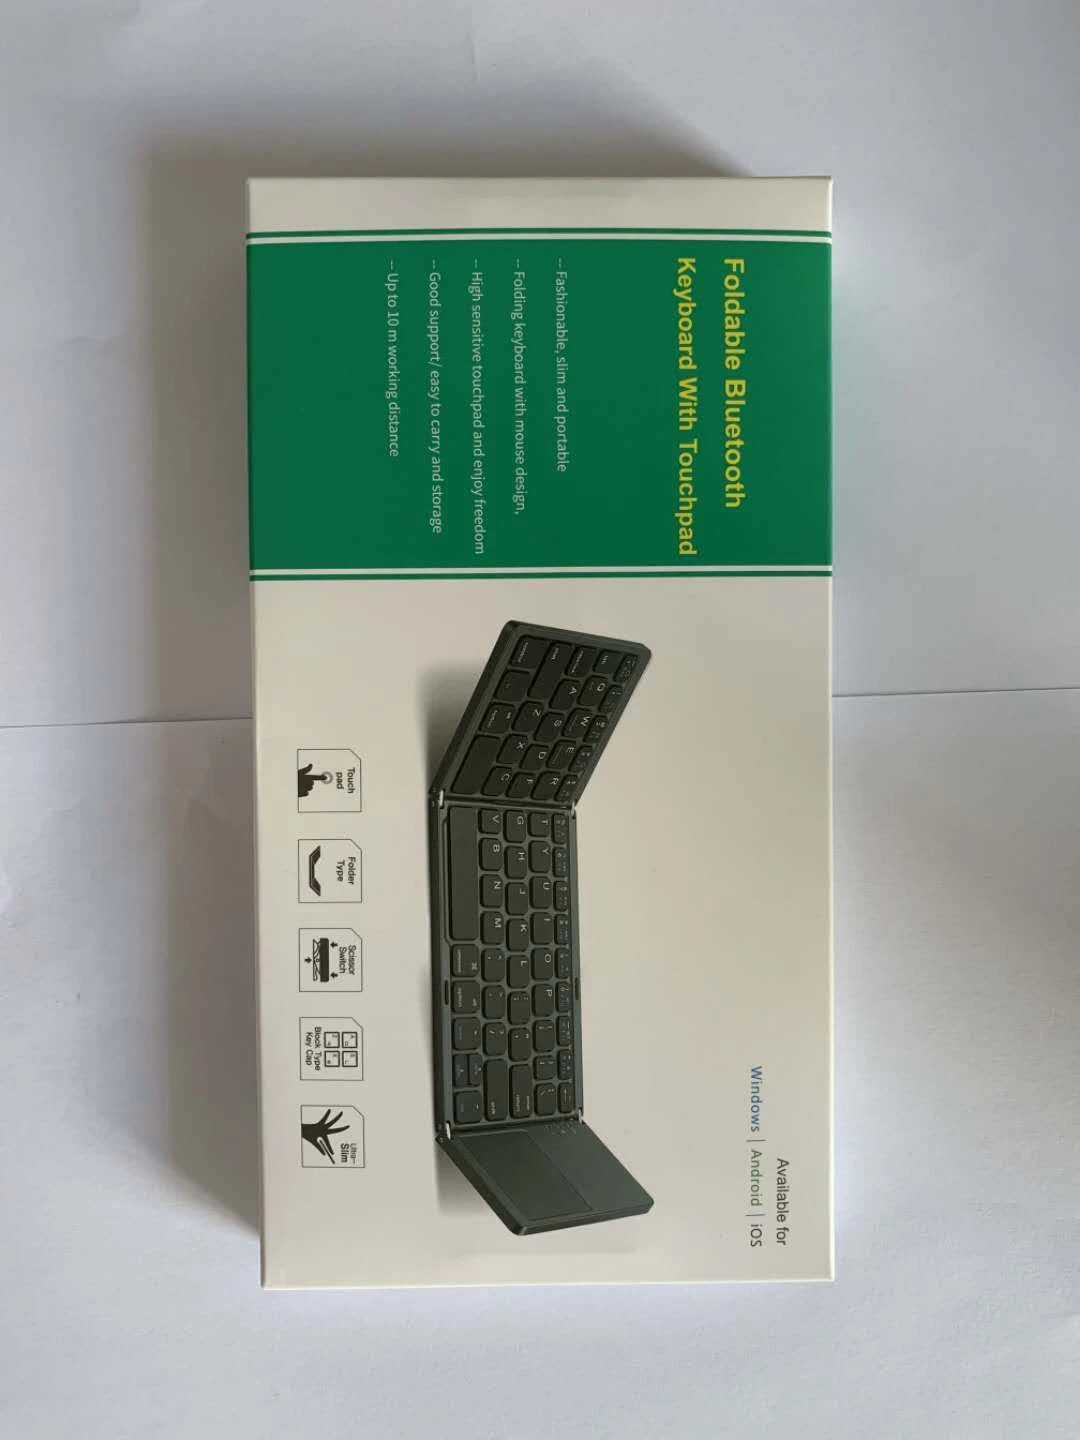 portable mini foldable keyboards BT Wireless Keyboard with Touchpad Mouse for Windows,Android,ios,Tablet ipad,Phone